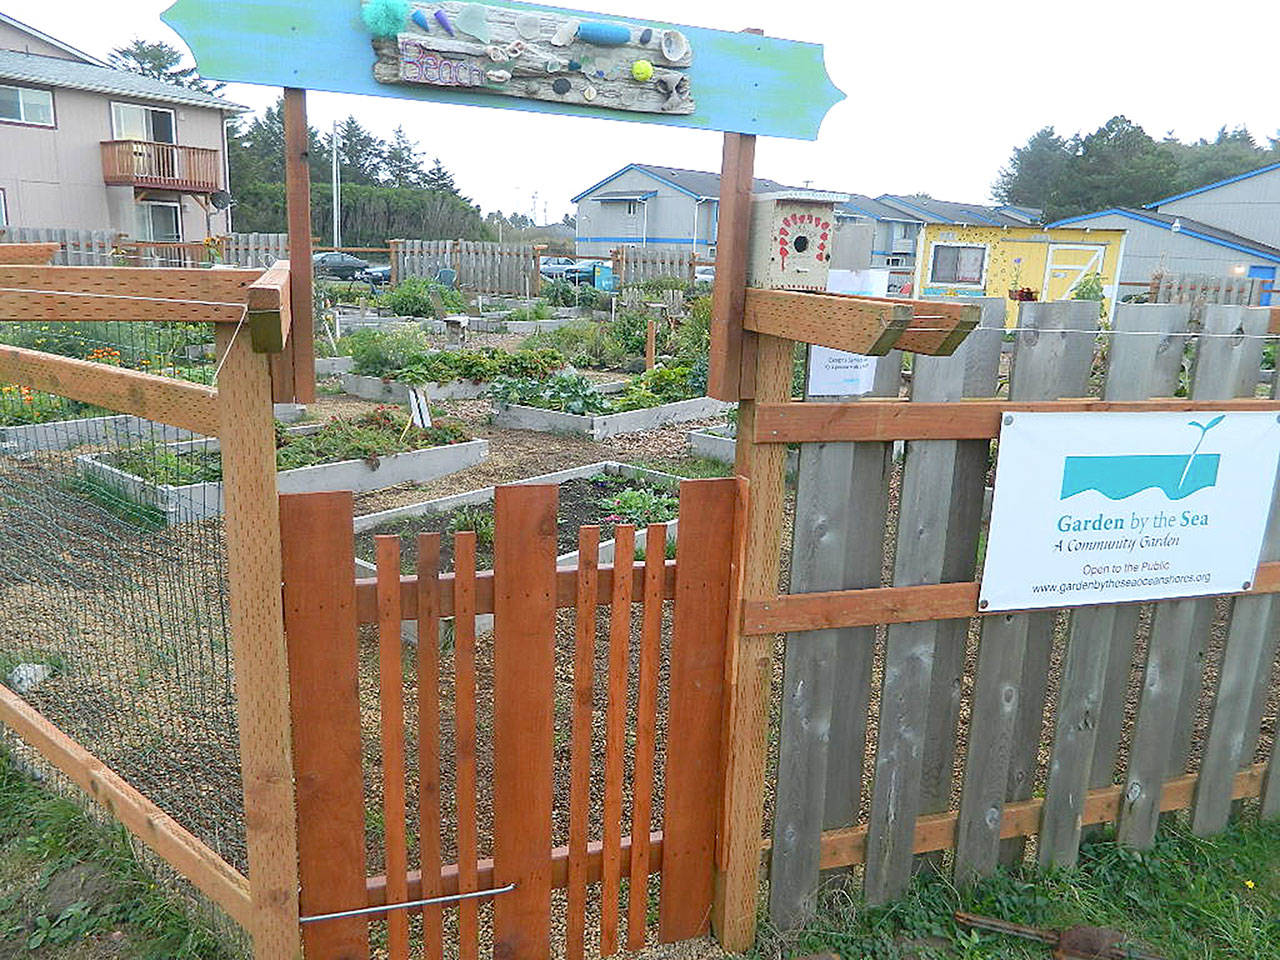 Garden by the Sea in Ocean Shores took applications in late March for community garden plot rentals and sold out its waiting list. (Courtesy Photos)